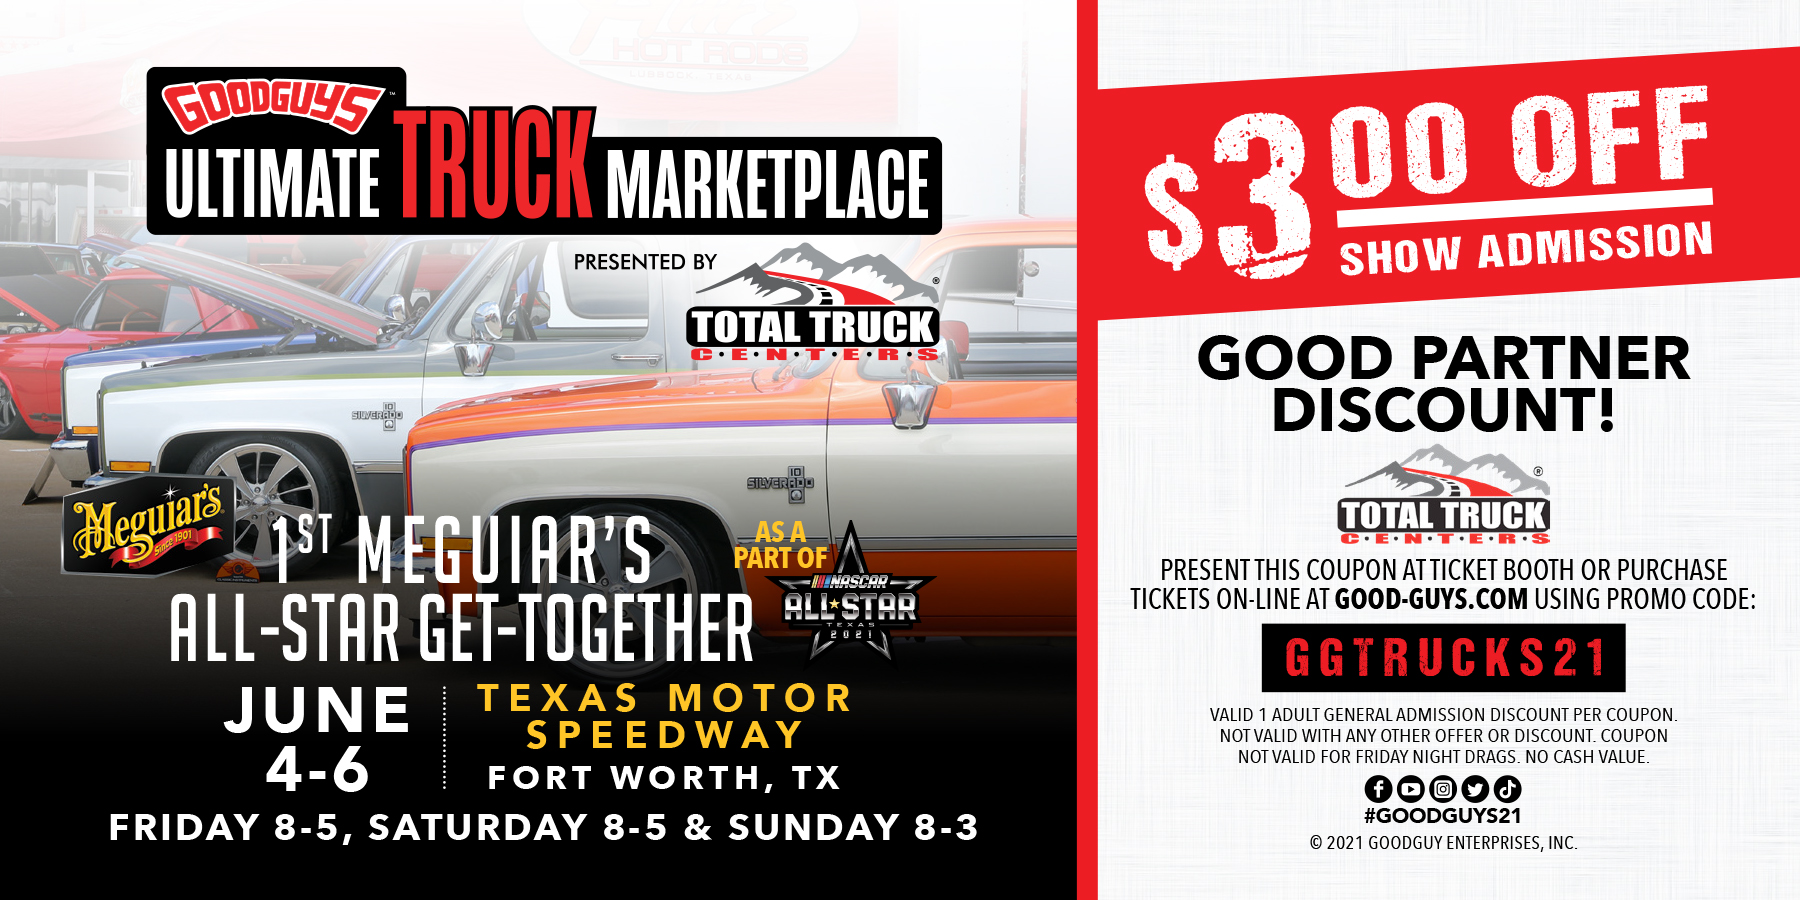 Ultimate Truck Marketplace Ticket Discount Now Available! Total Truck